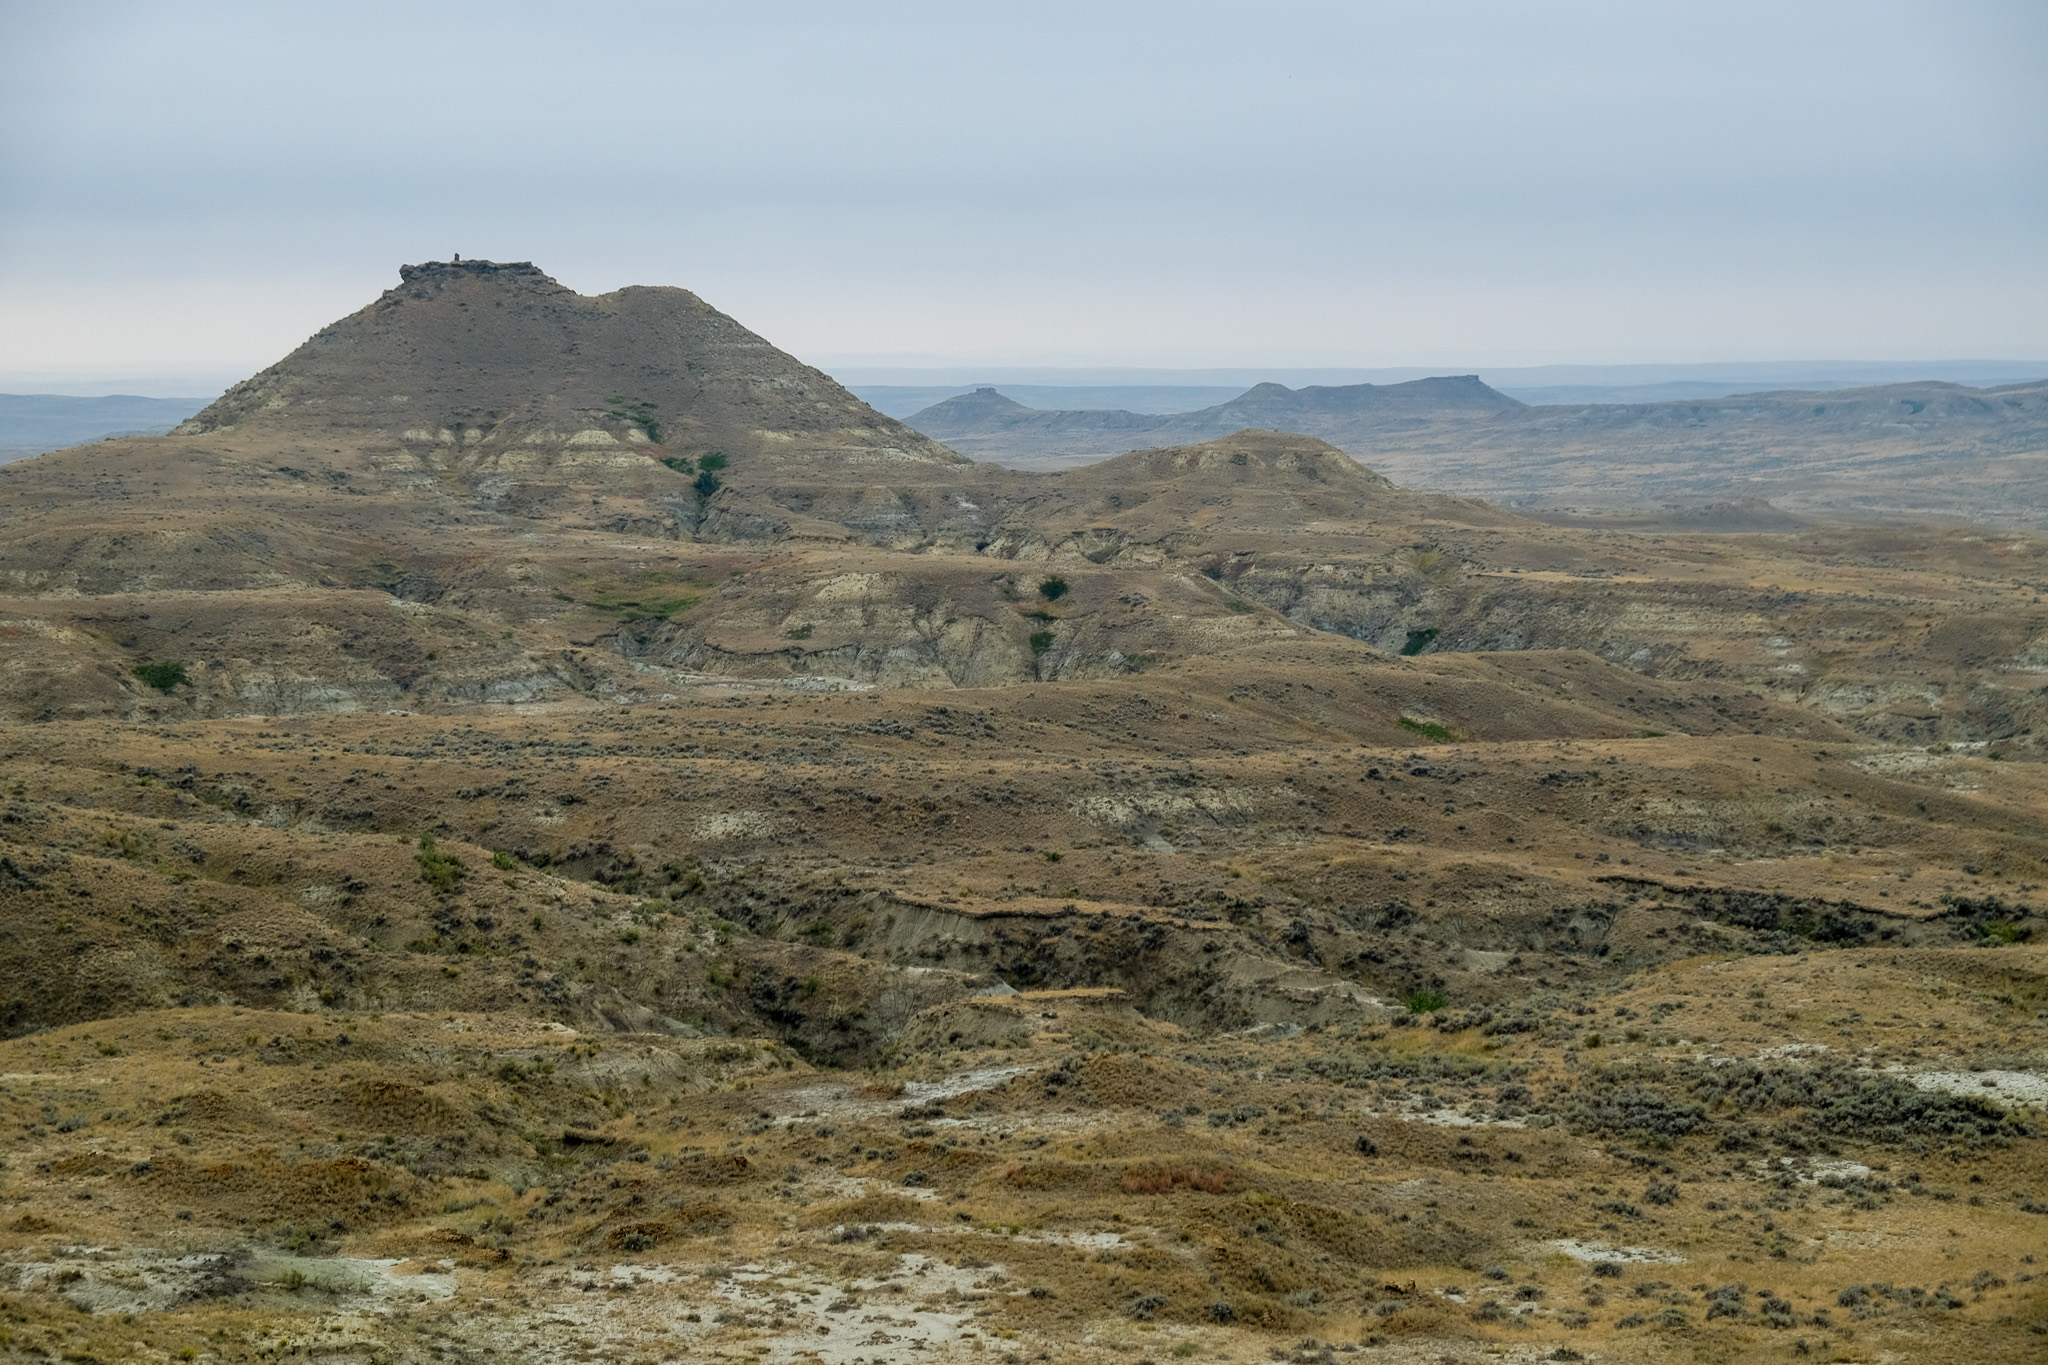 Badlands on a cloudy day.